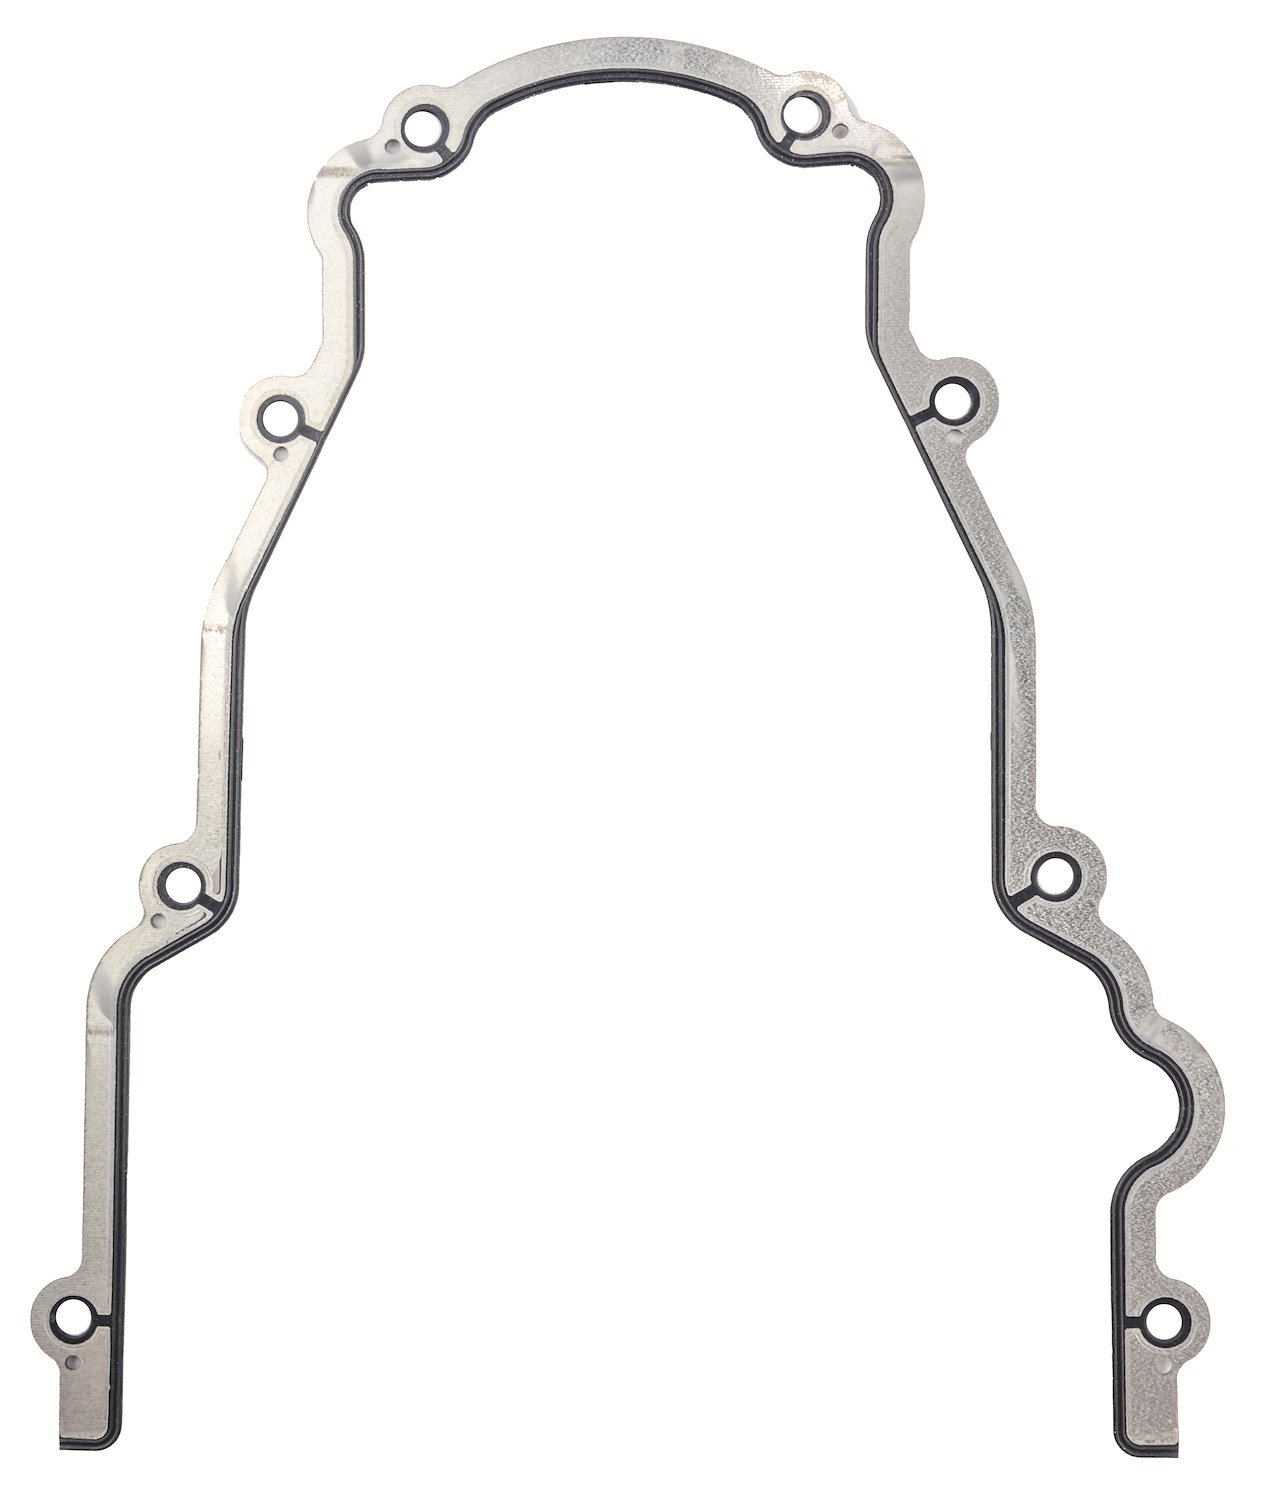 JEGS Timing Cover Fits 1965-1990 Big Block Chevy Engines Polished Cast Aluminum Includes Timing Cover, Timing Cover Gasket, Water Pump Gaskets, - 3